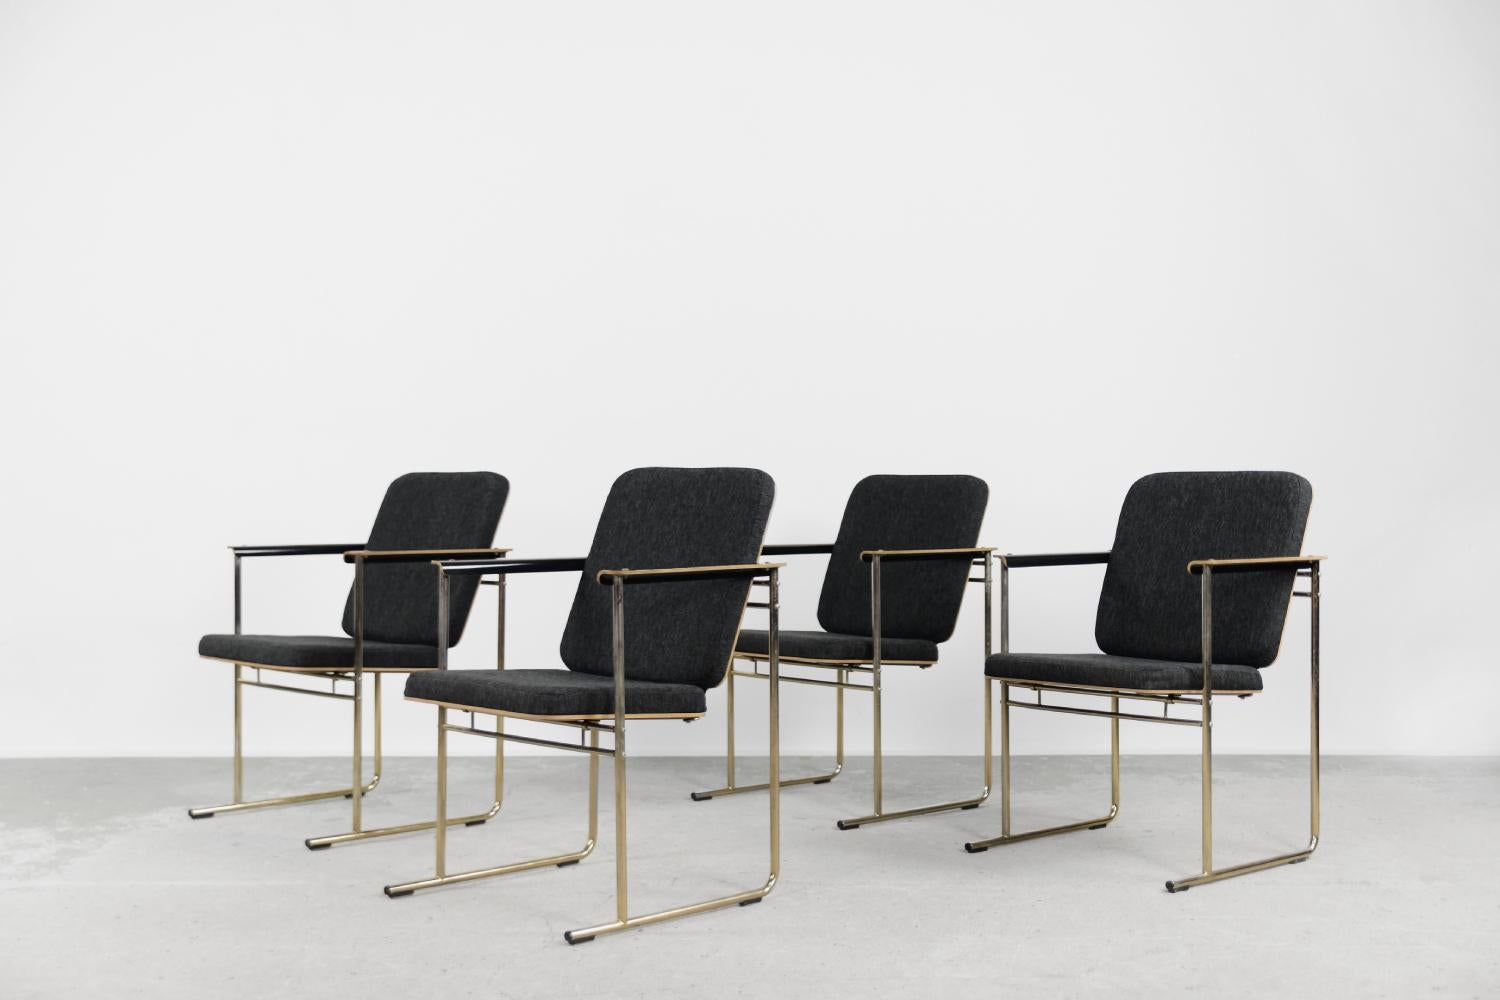 This set of four Skaala chairs was designed by Yrjö Kukkapuro for the Finnish Avarte manufacture during the 1980s. Due to their modern and minimal look, they will easily find their place in the living room or office. The Skaala chair perfectly